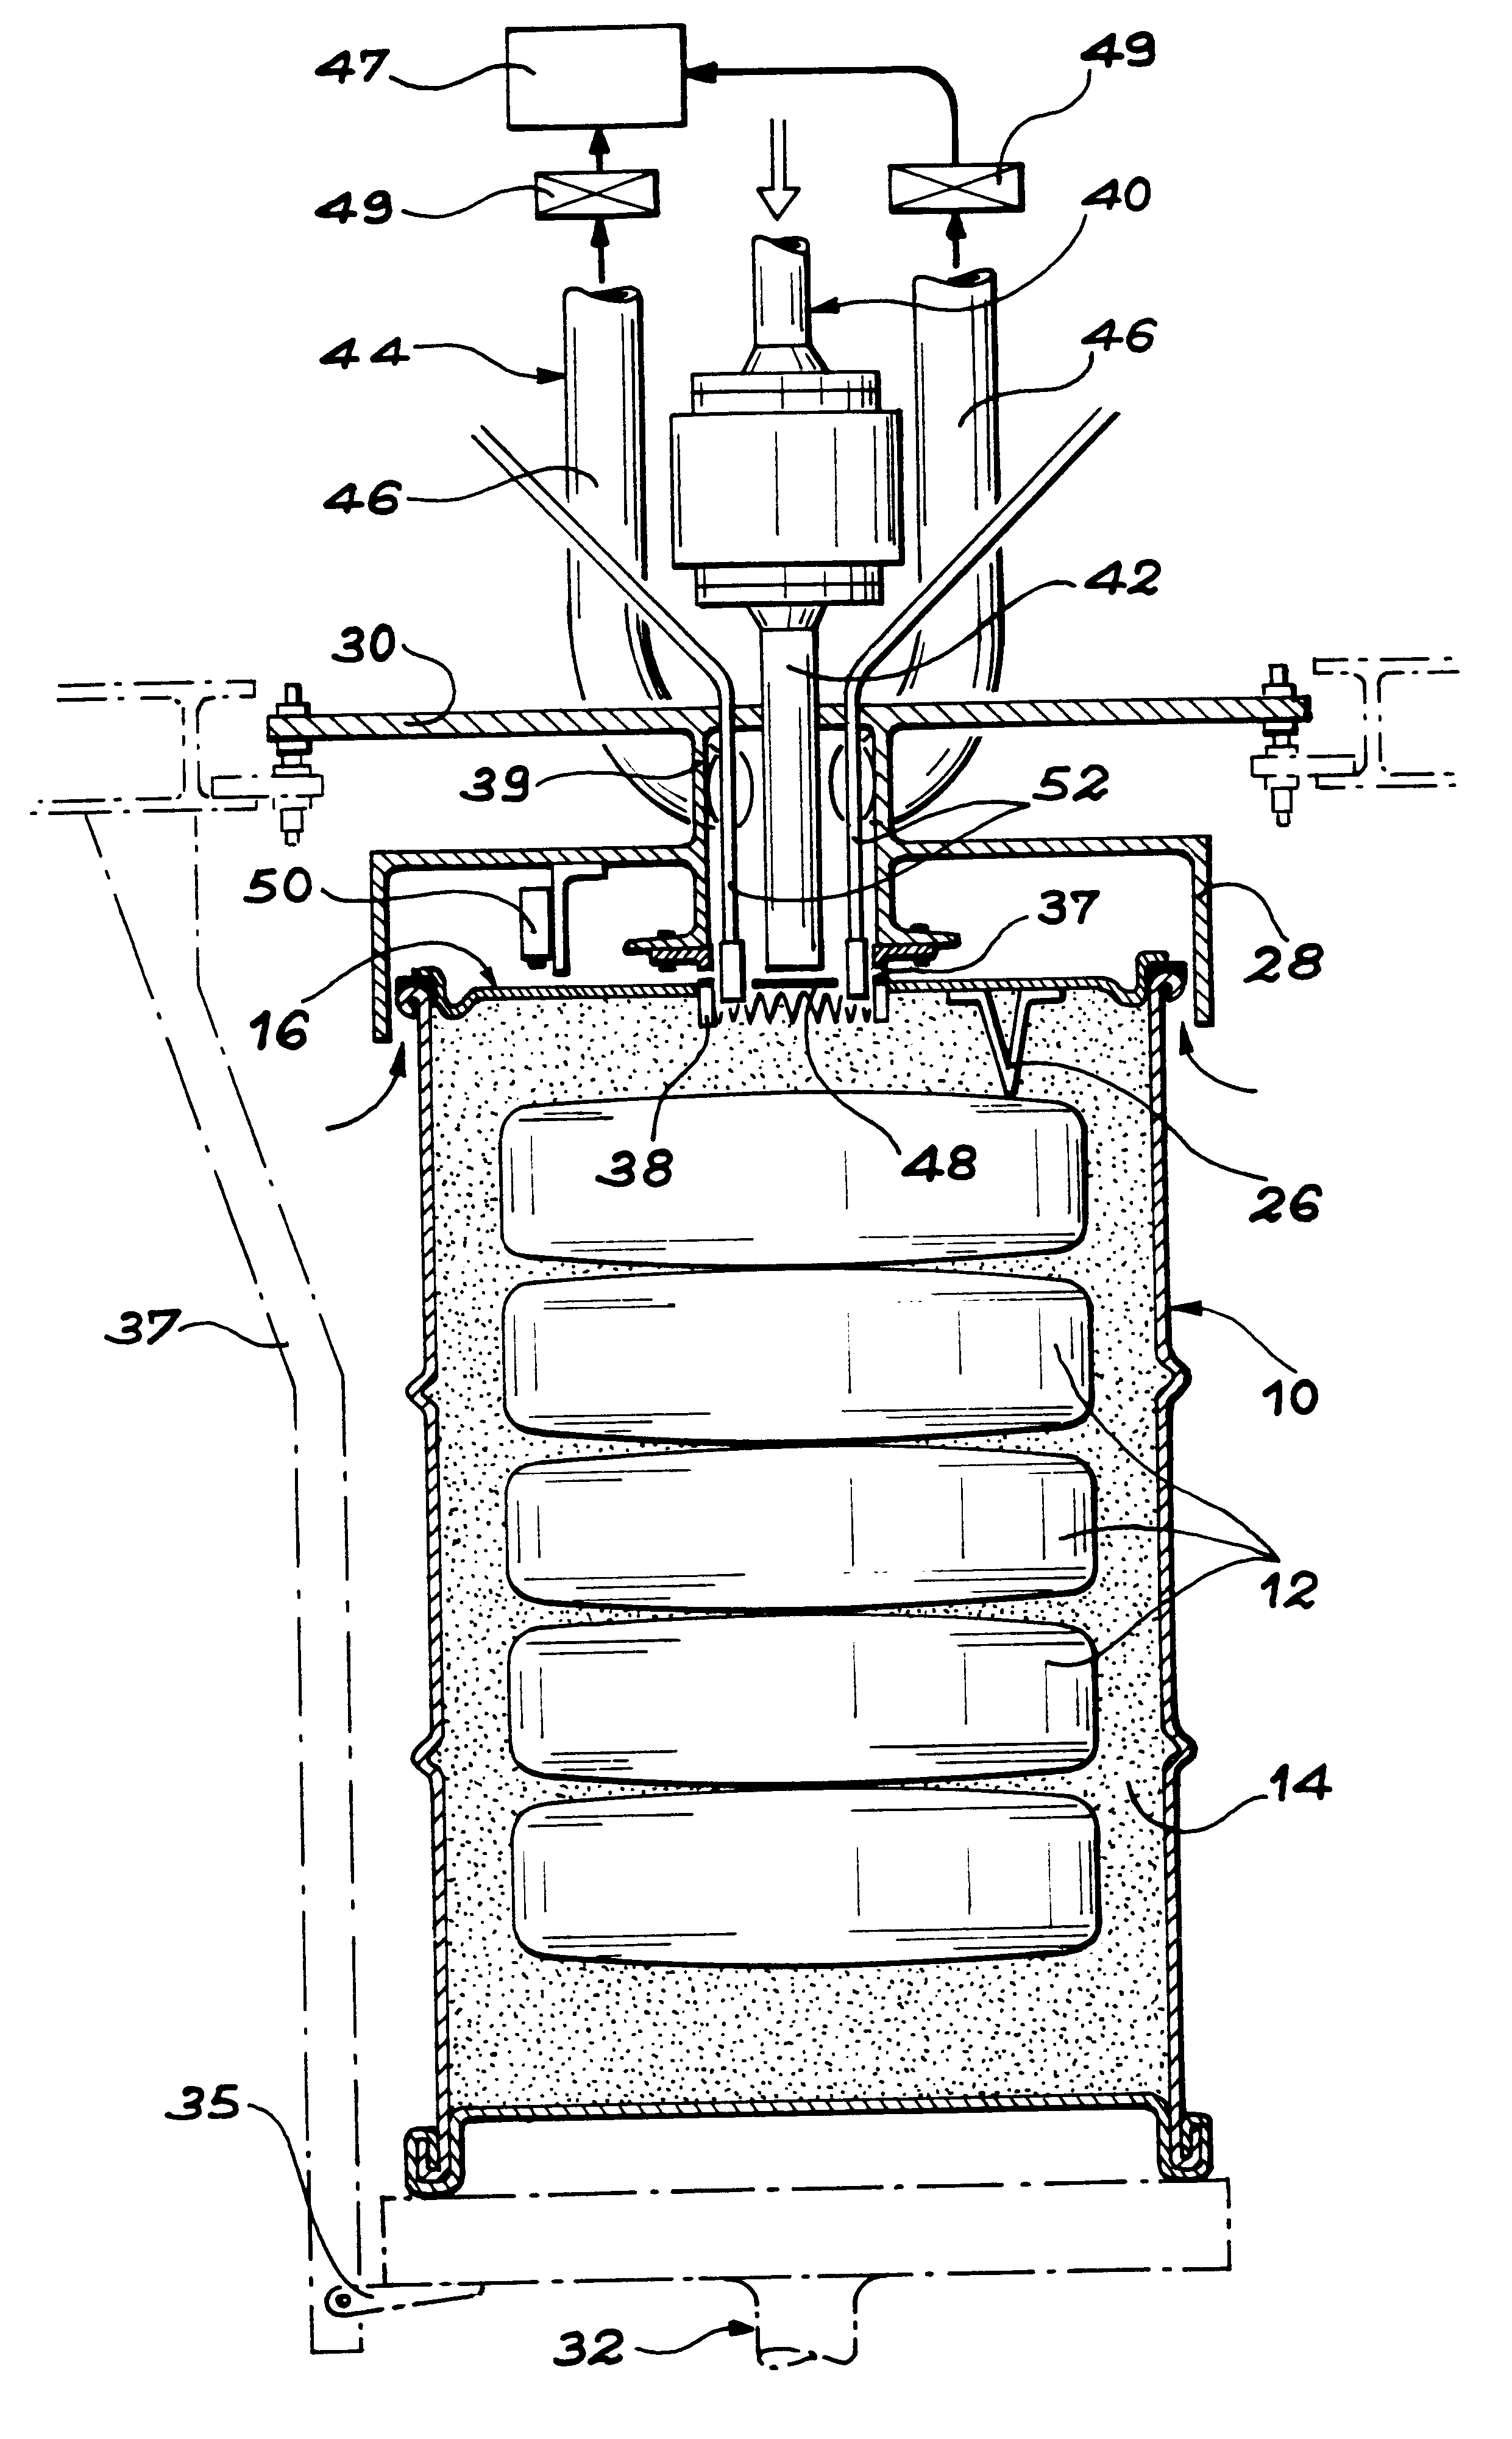 Method and device for filling drums containing dangerous waste